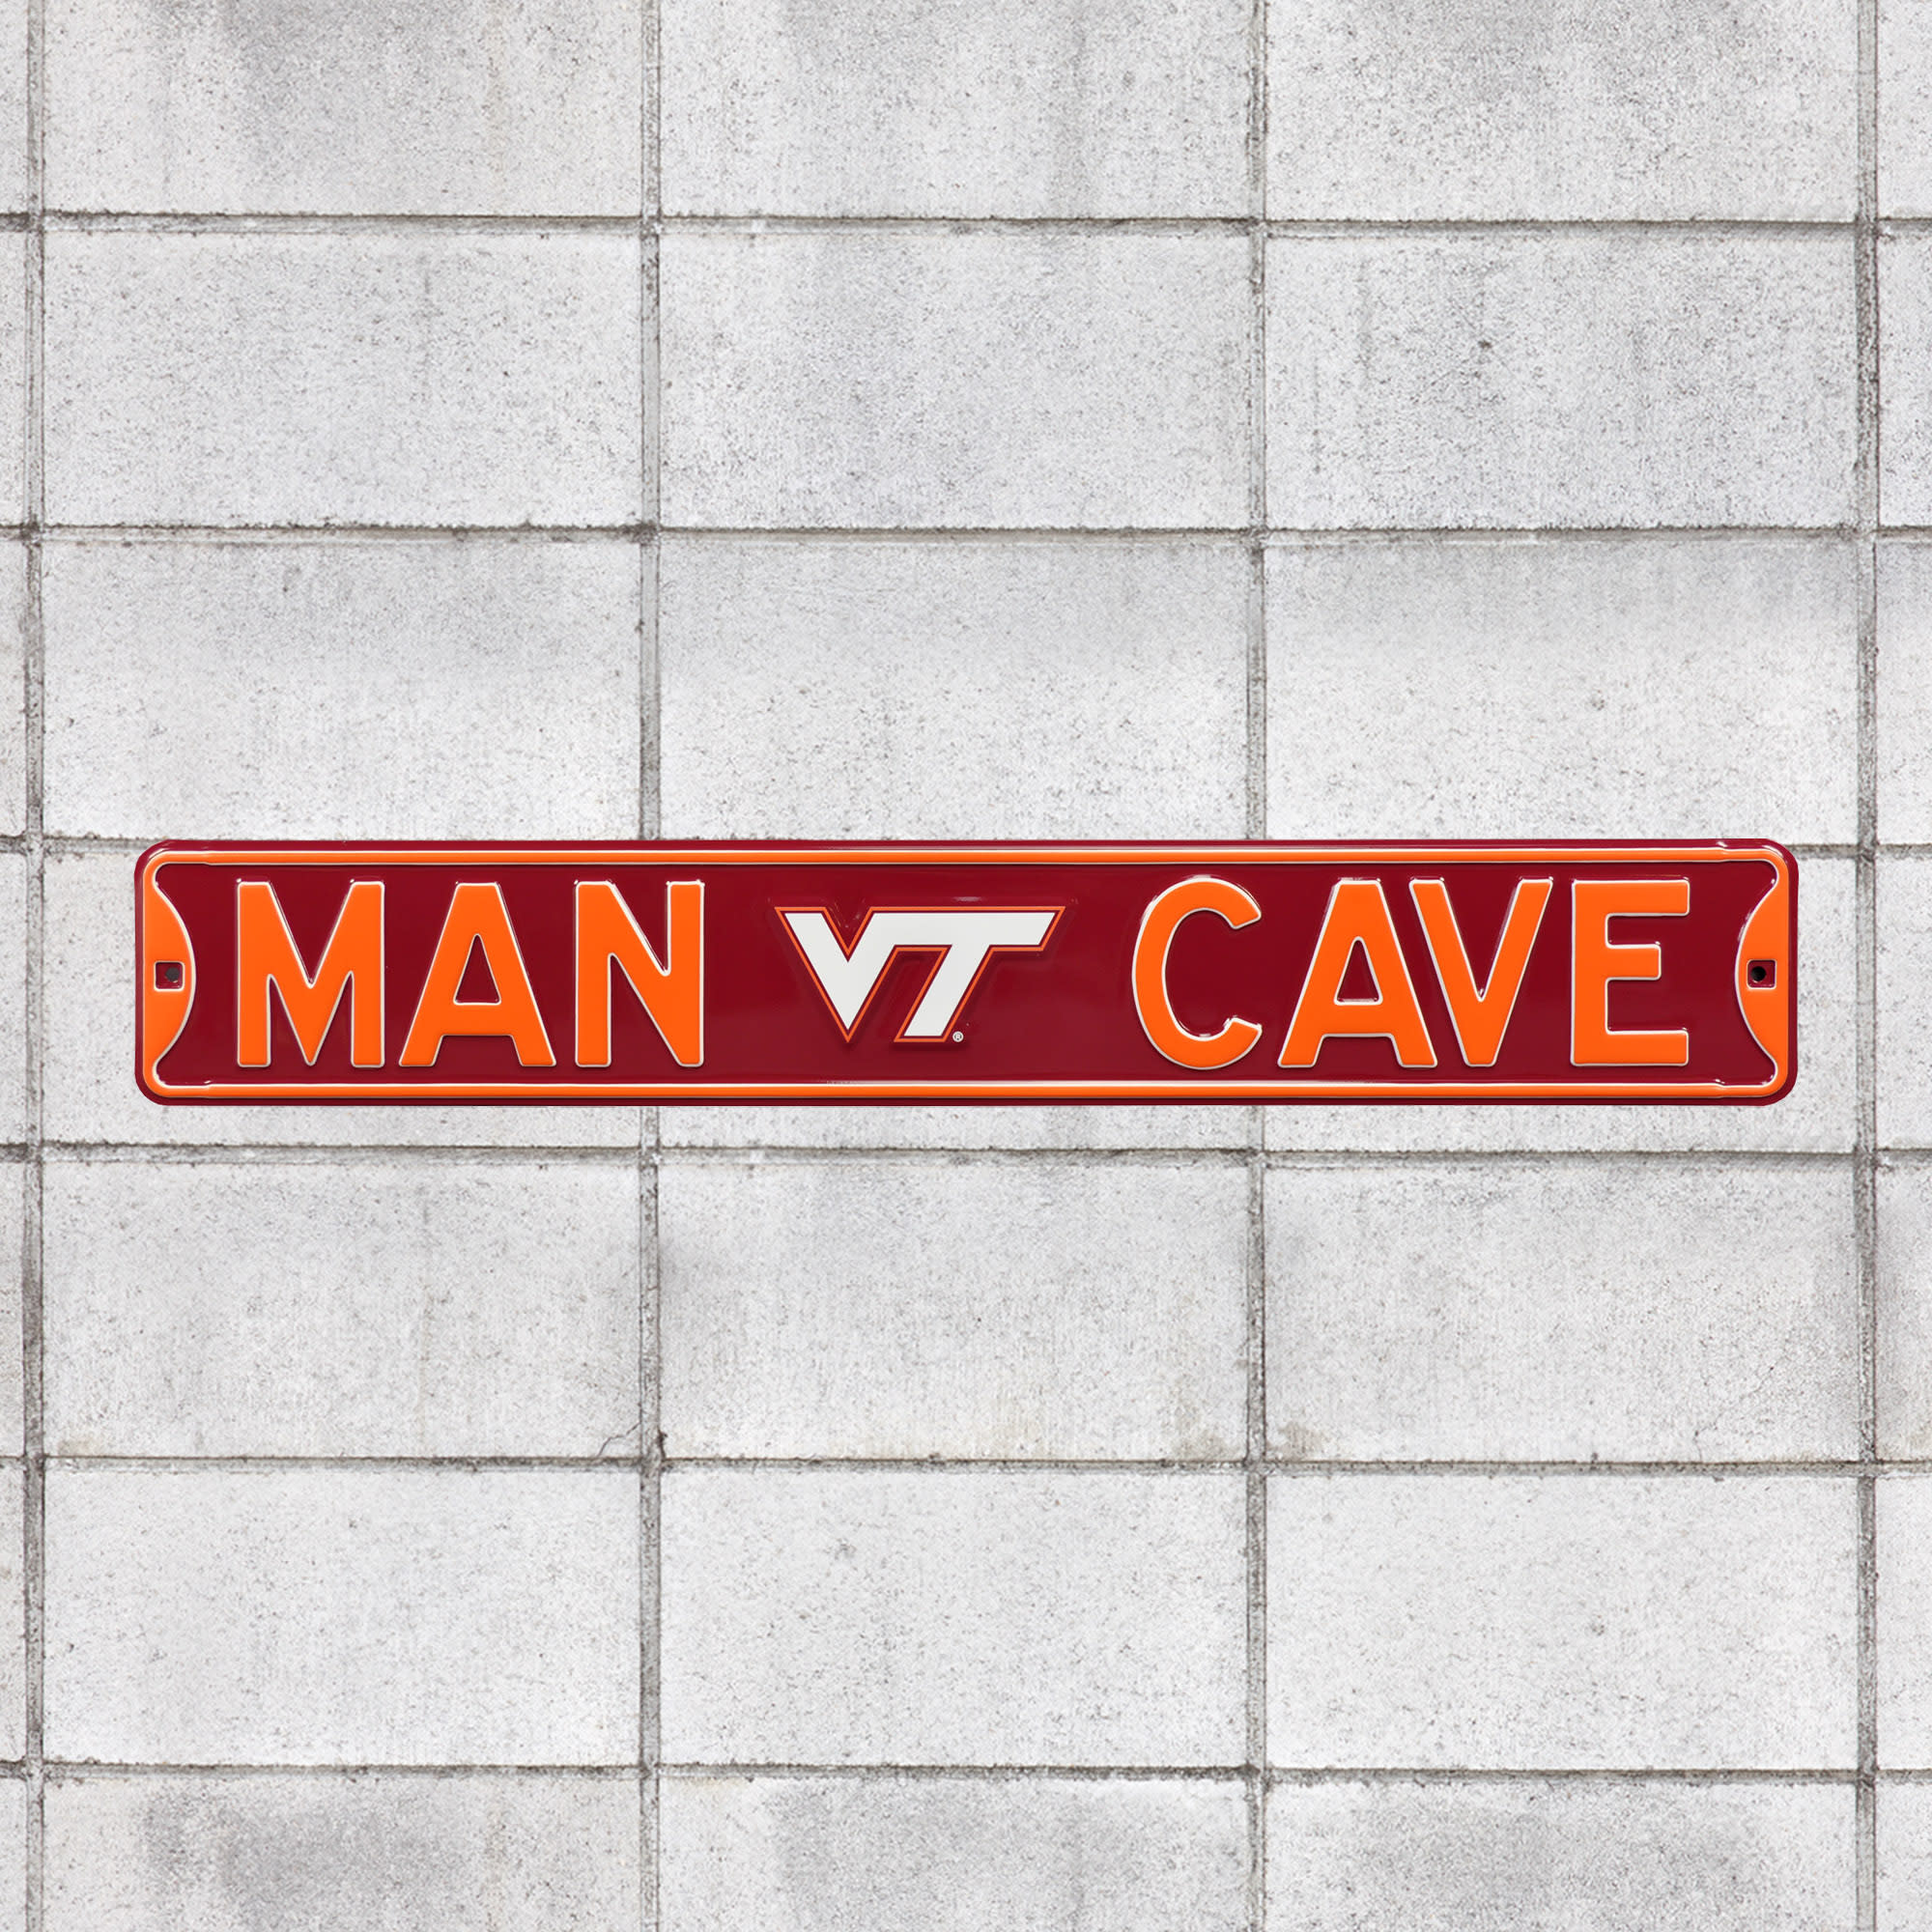 Virginia Tech Hokies: Man Cave - Officially Licensed Metal Street Sign 36.0"W x 6.0"H by Fathead | 100% Steel